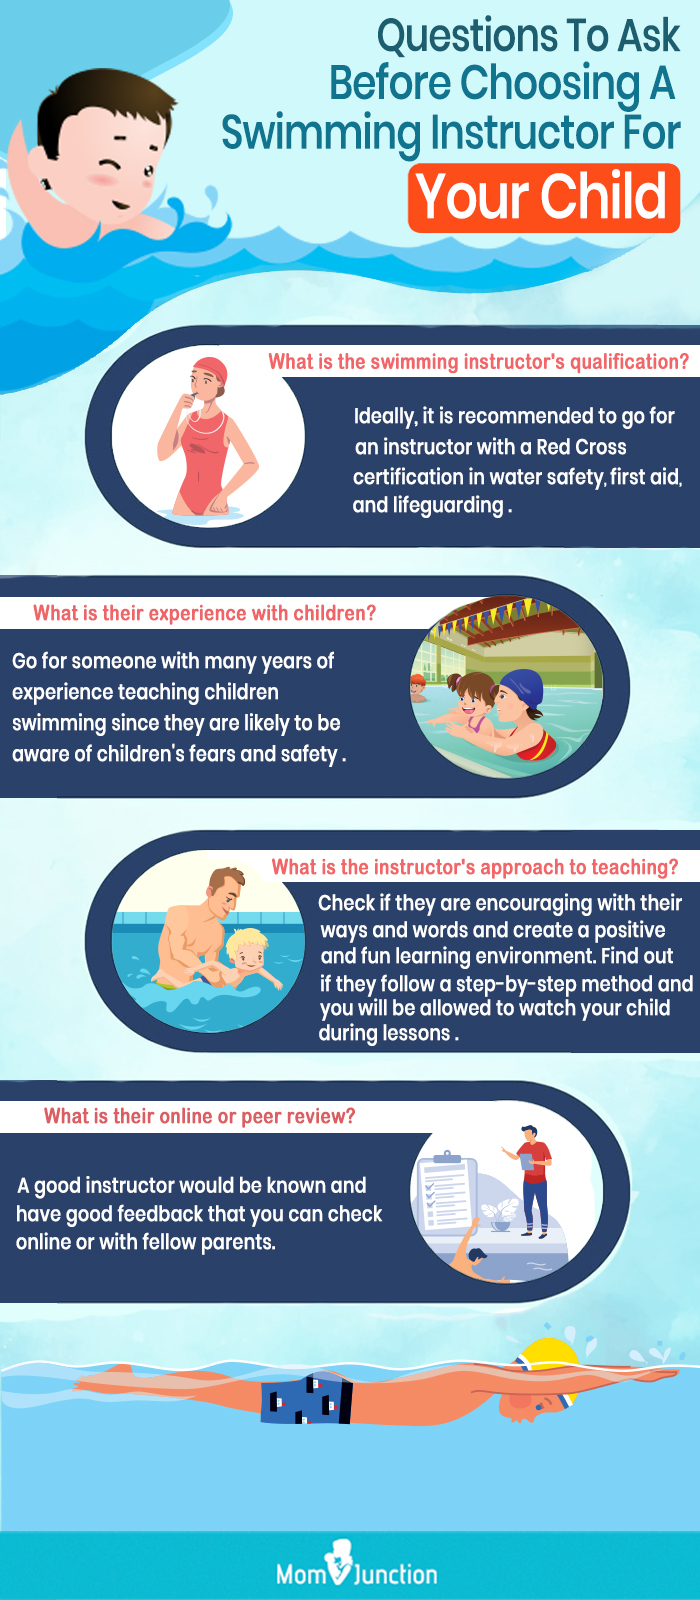 How to Teach Your Child to Swim